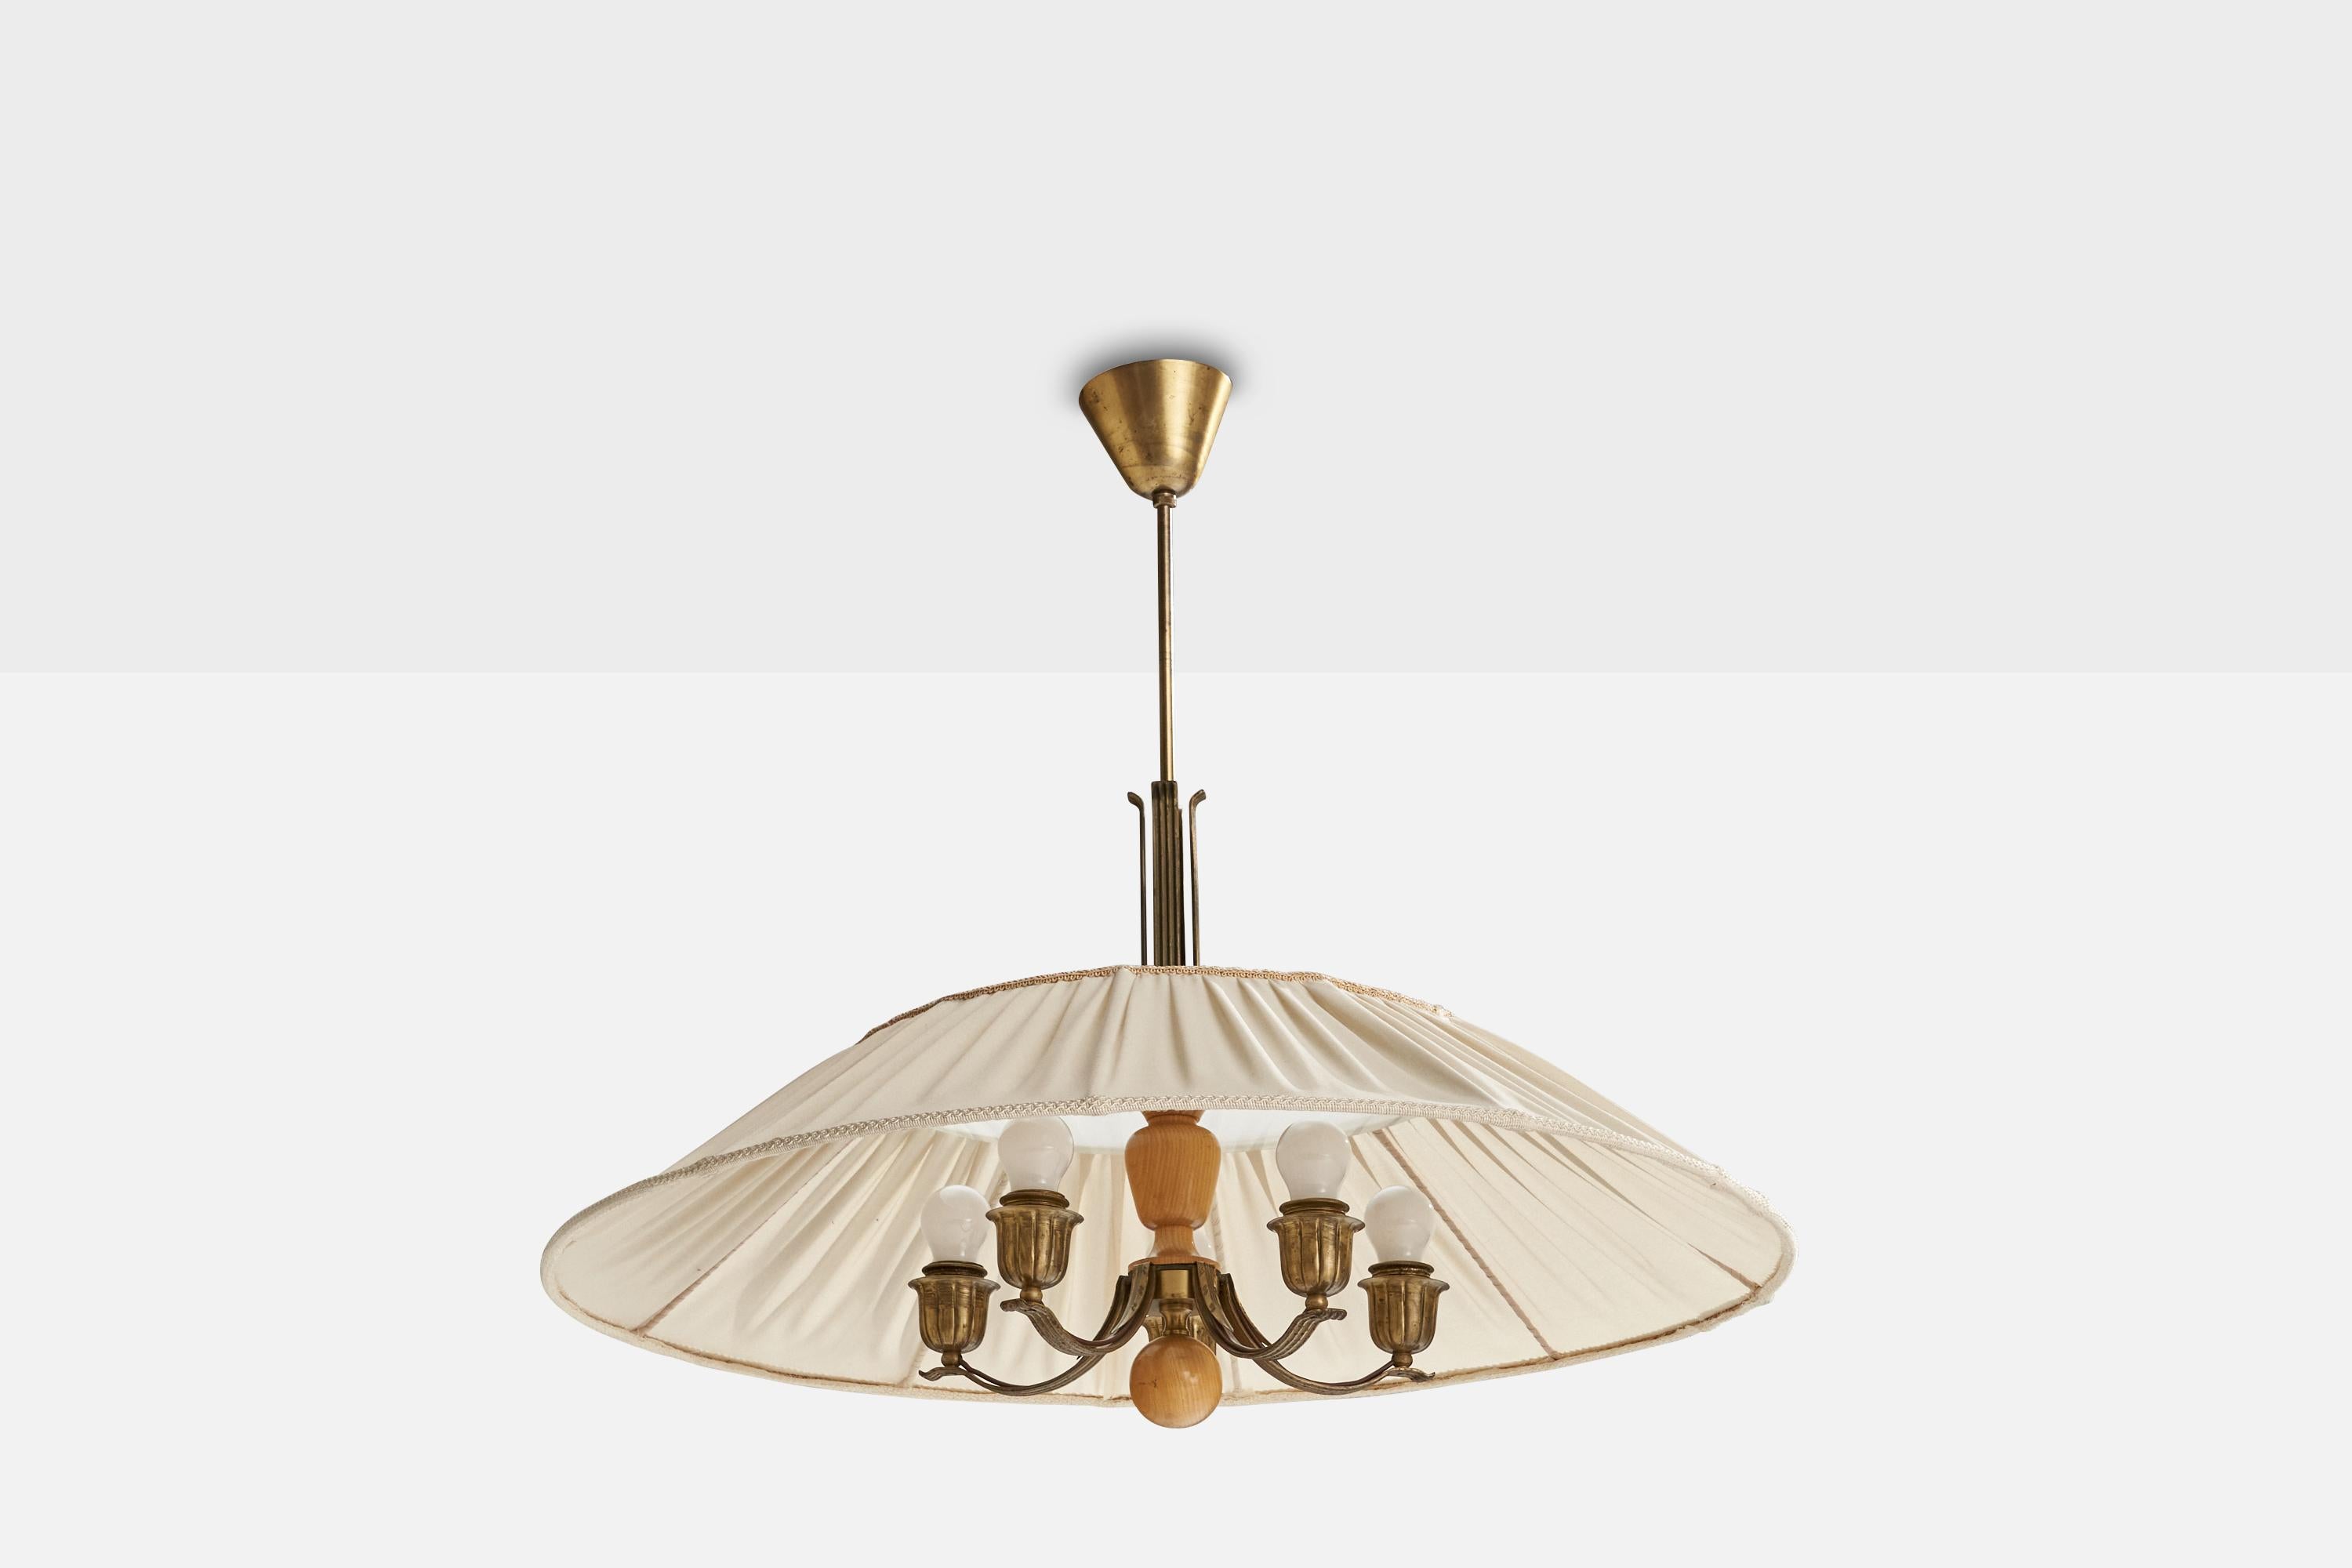 A brass, oak and white fabric chandelier or pendant designed by Harald Notini and produced by Böhlmarks, Sweden, 1940s.

Dimensions of canopy (inches): 4.10” H x 3.50” Diameter
Socket takes standard E-26 bulbs. 5 socket.There is no maximum wattage